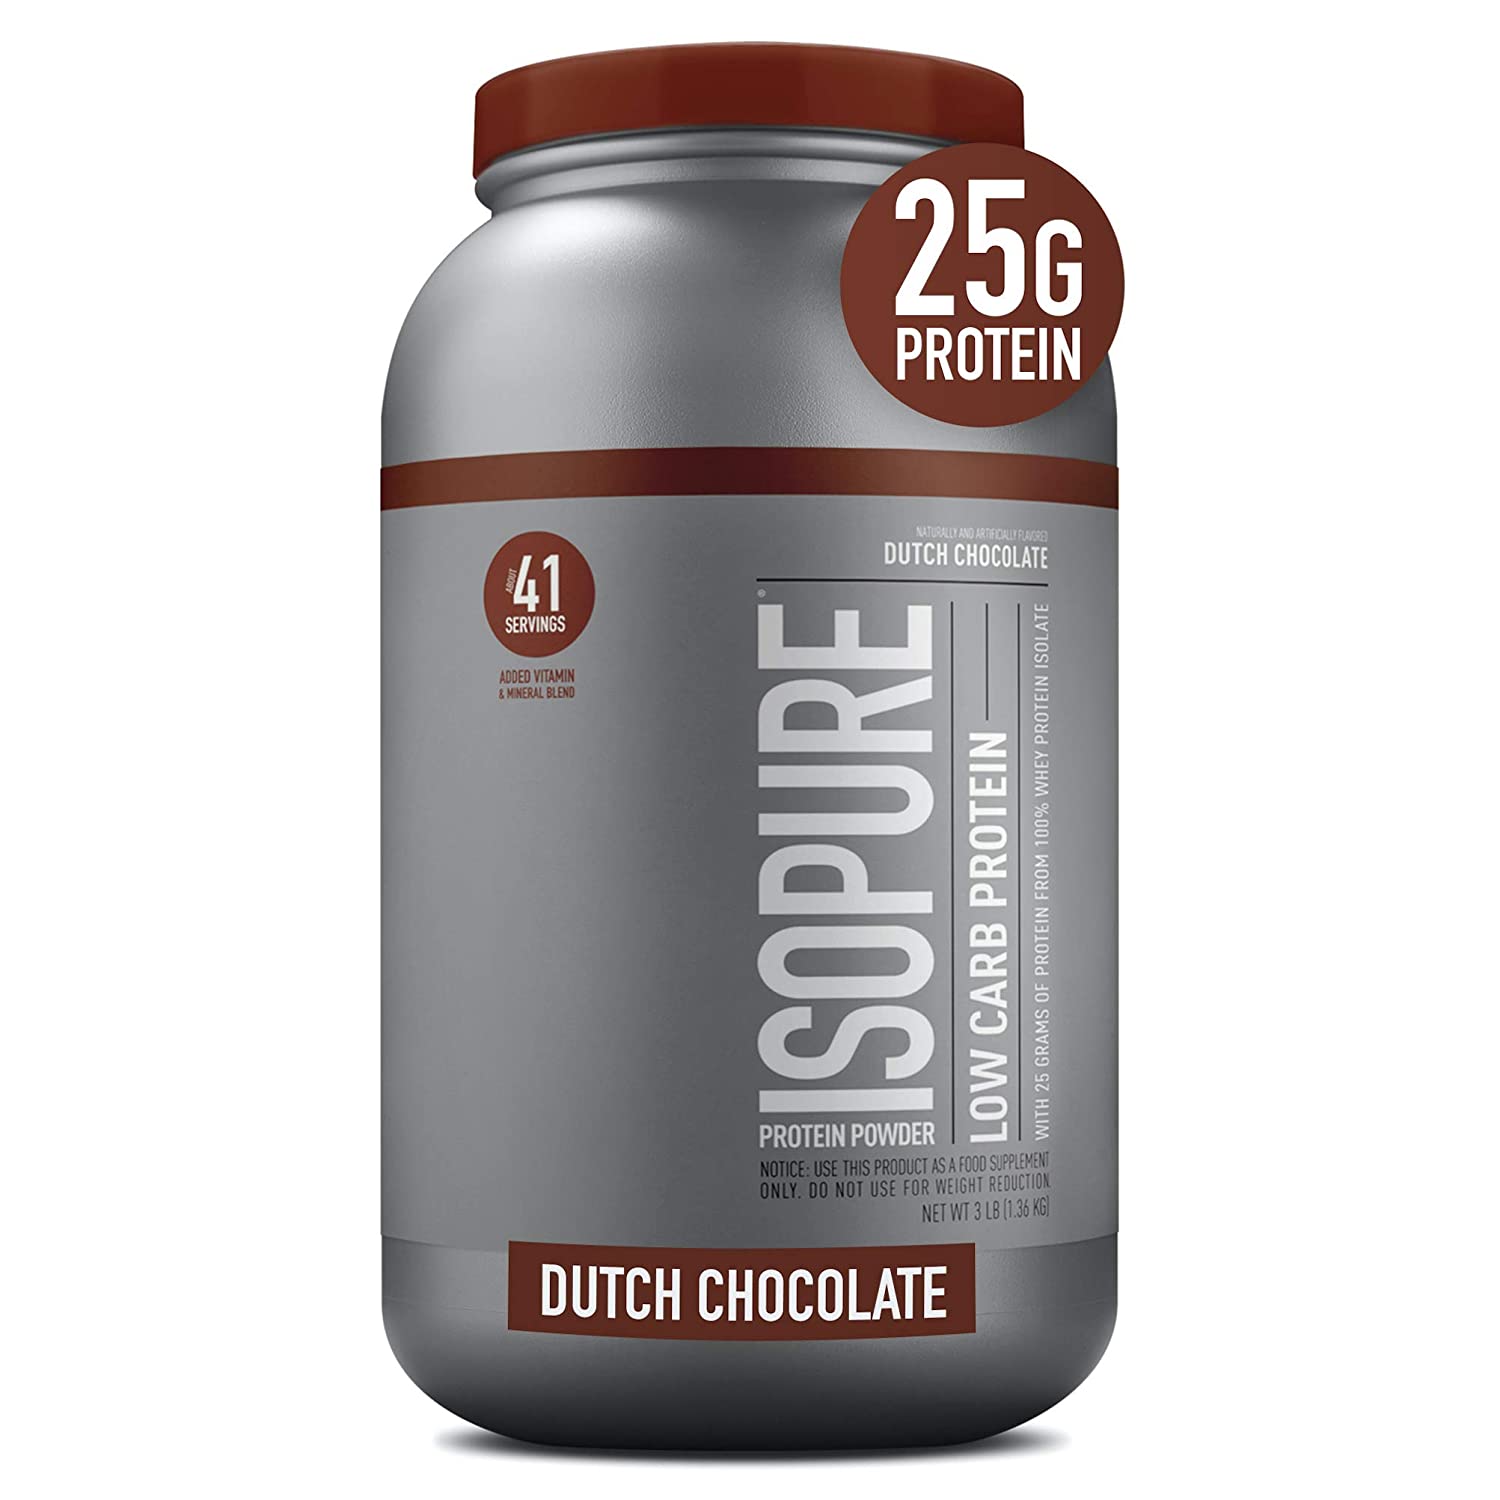 Isopure Low Carb, Vitamin C and Zinc for Immune Support, 25g Protein, Keto Friendly Protein Powder